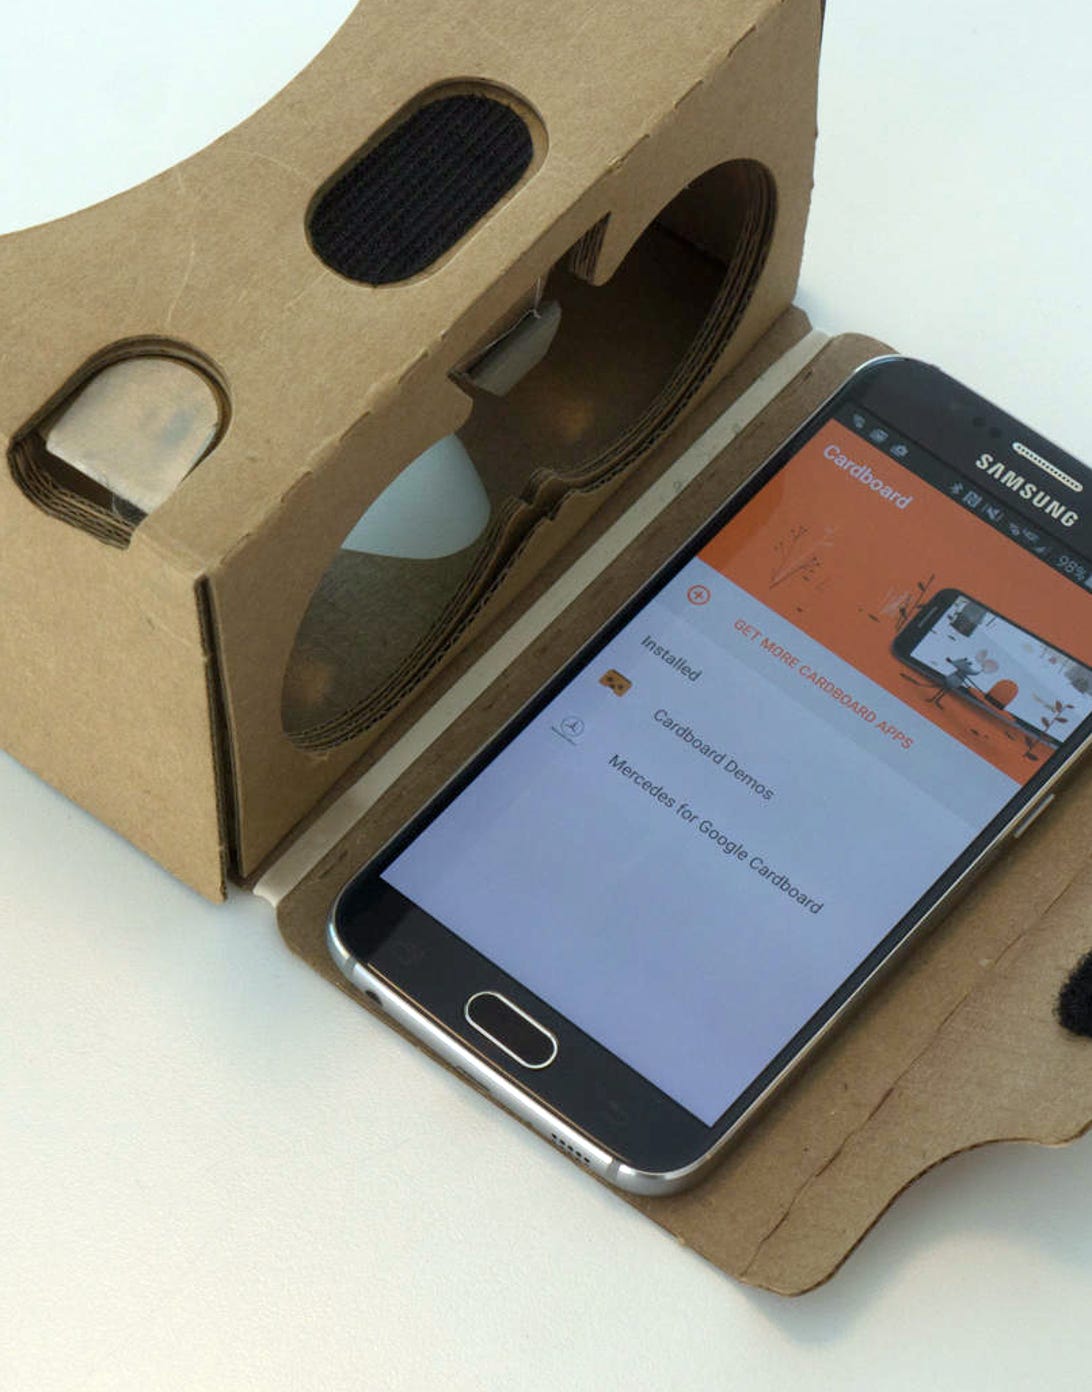 Google open-sources Cardboard in wake of Daydream VR’s demise